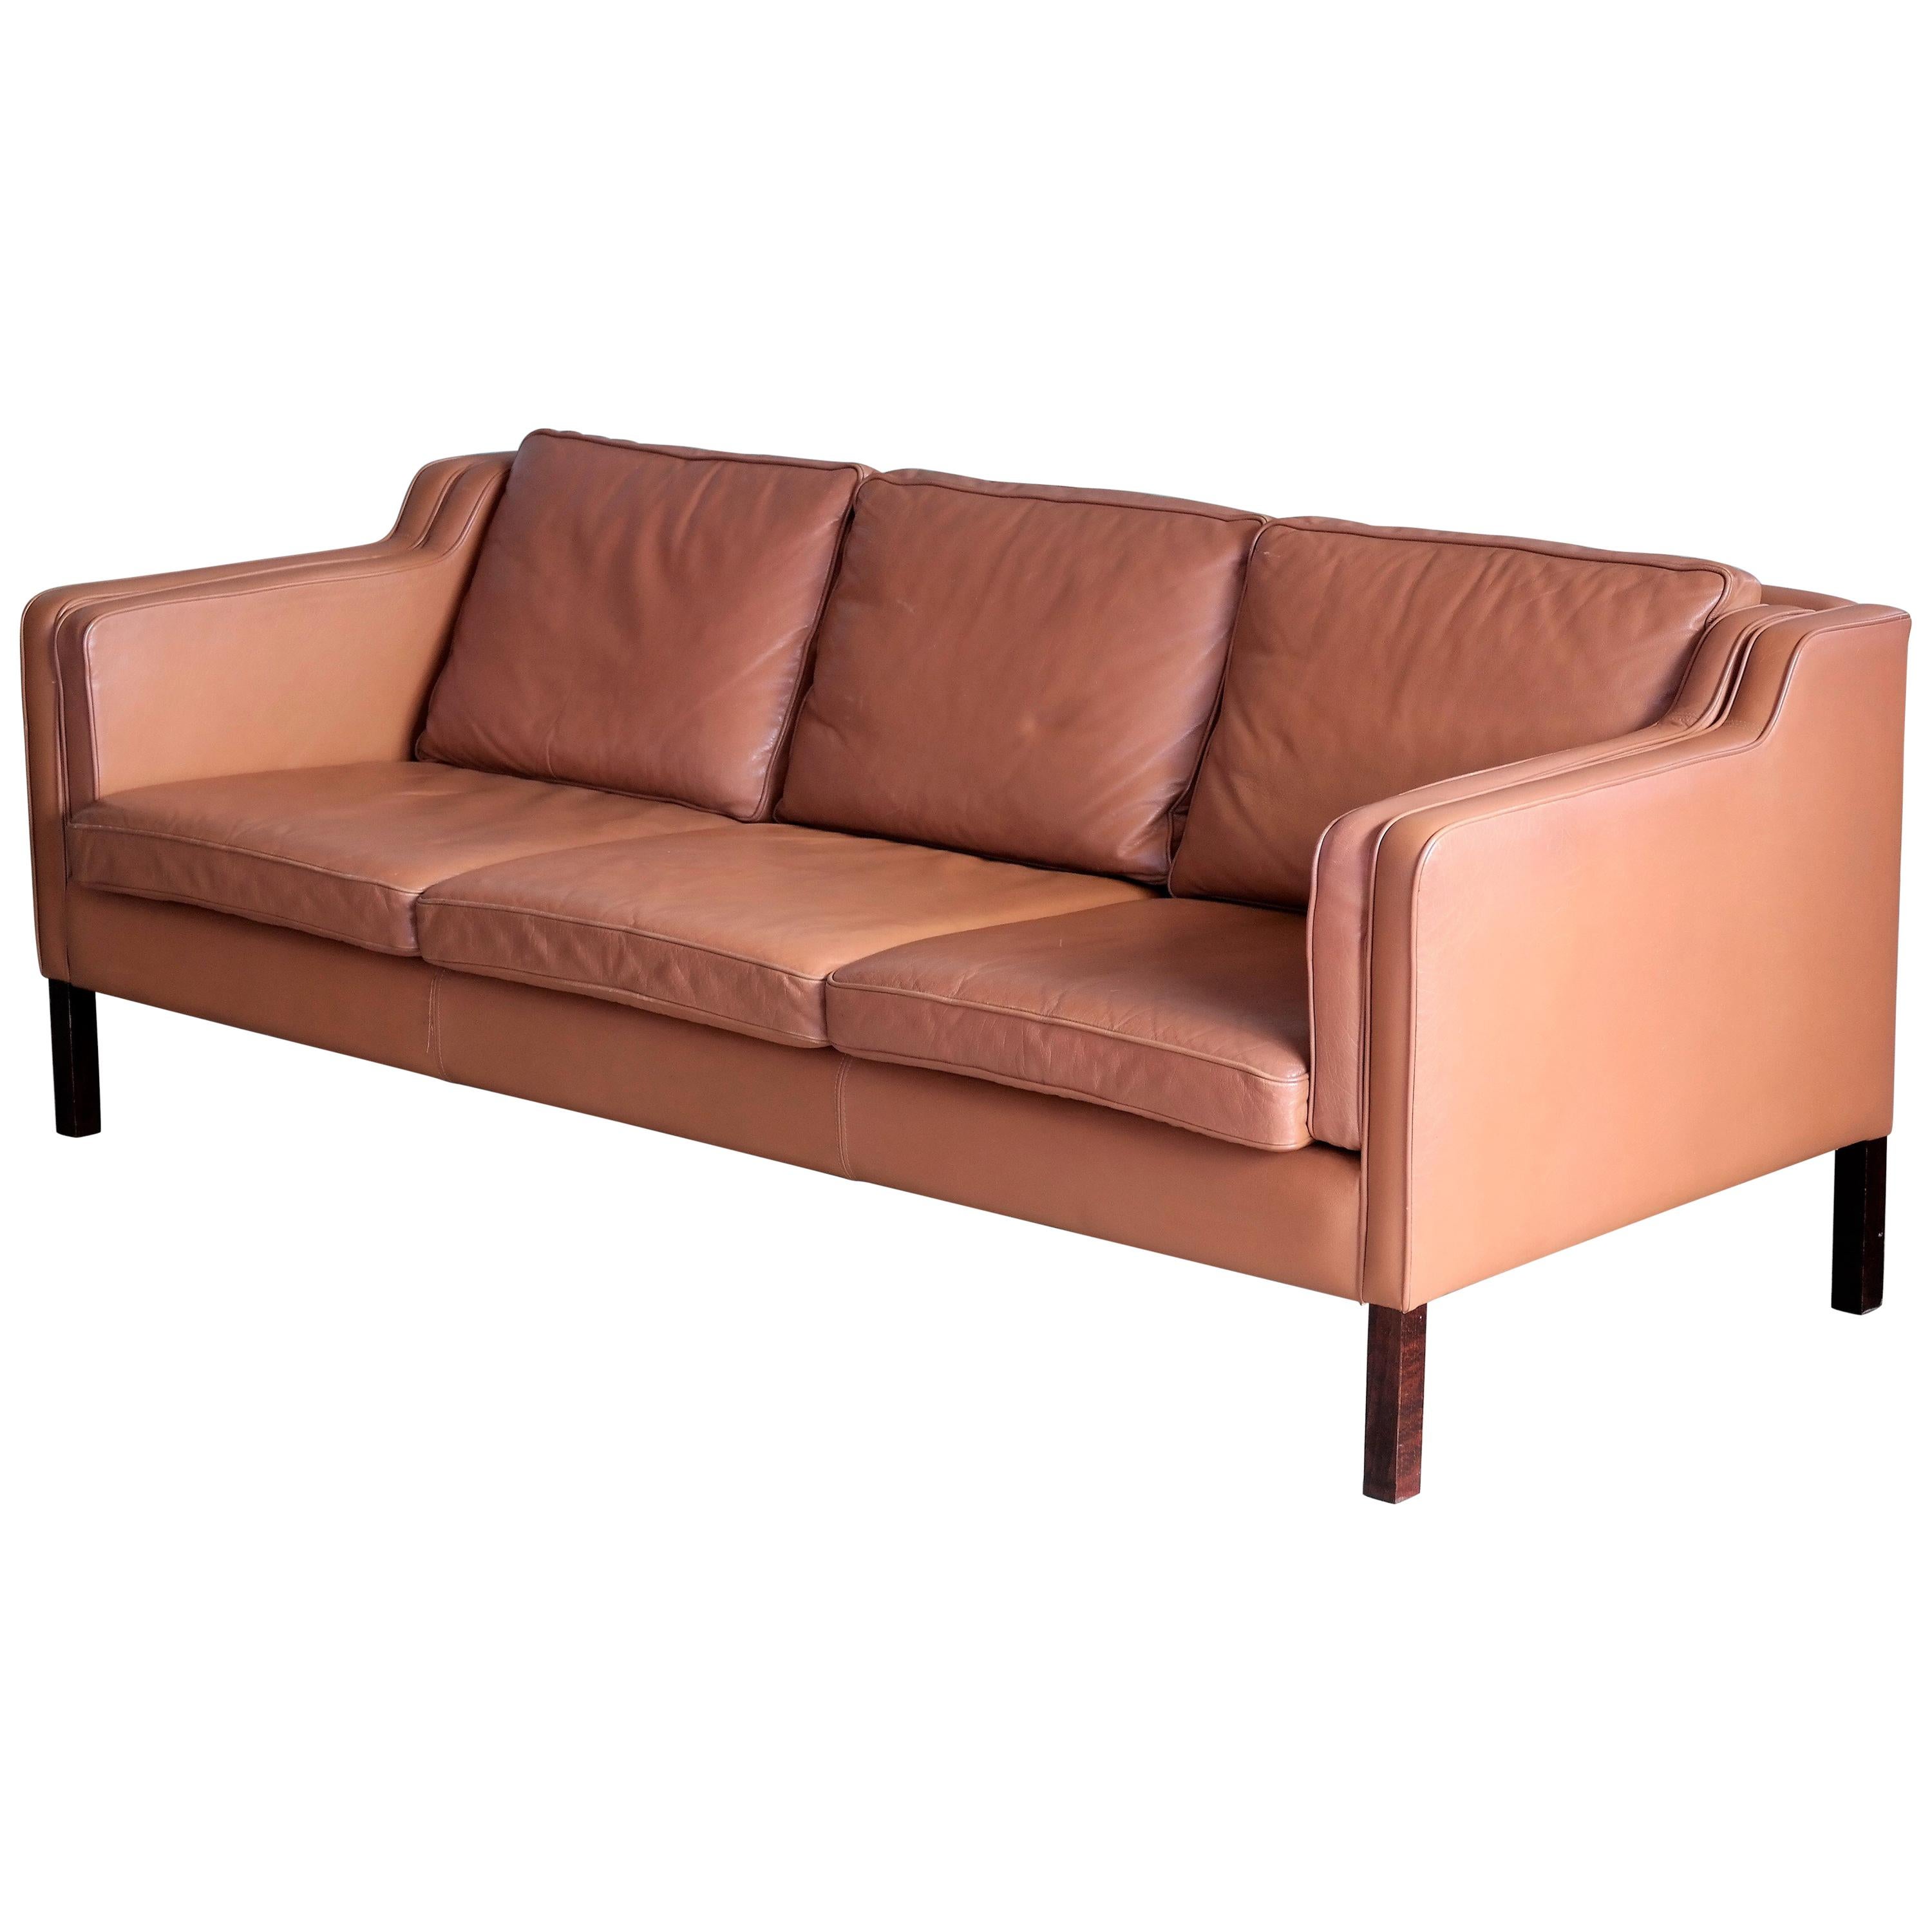 Borge Mogensen Style Model 2213 Three-Seat Sofa in Cognac Leather by Stouby